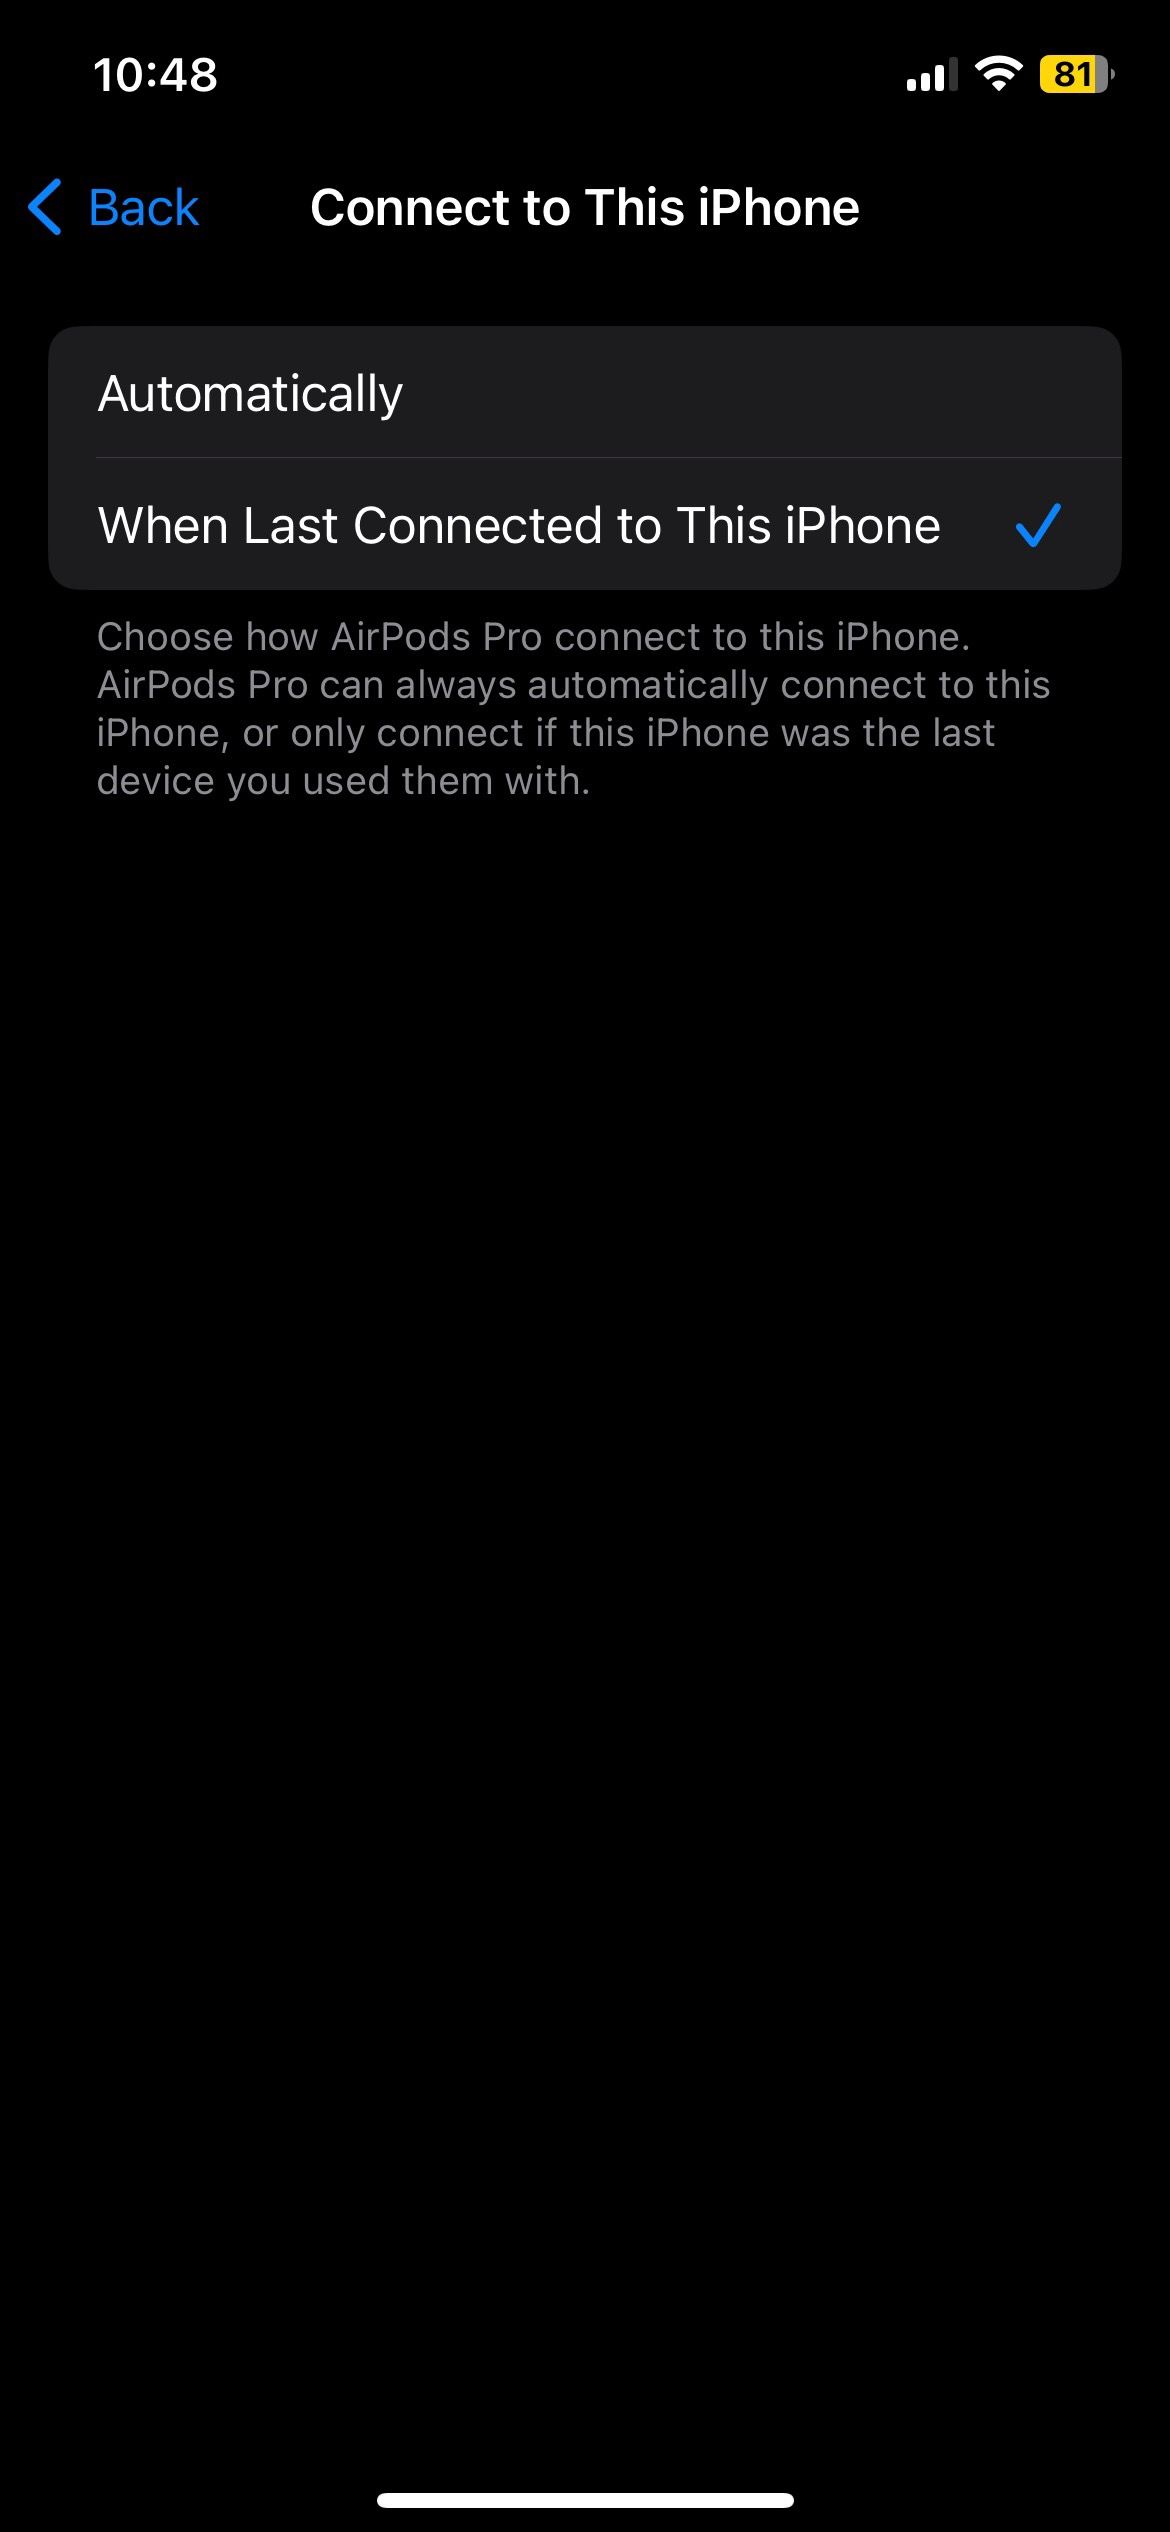 AirPods Connect to this iPhone settings page